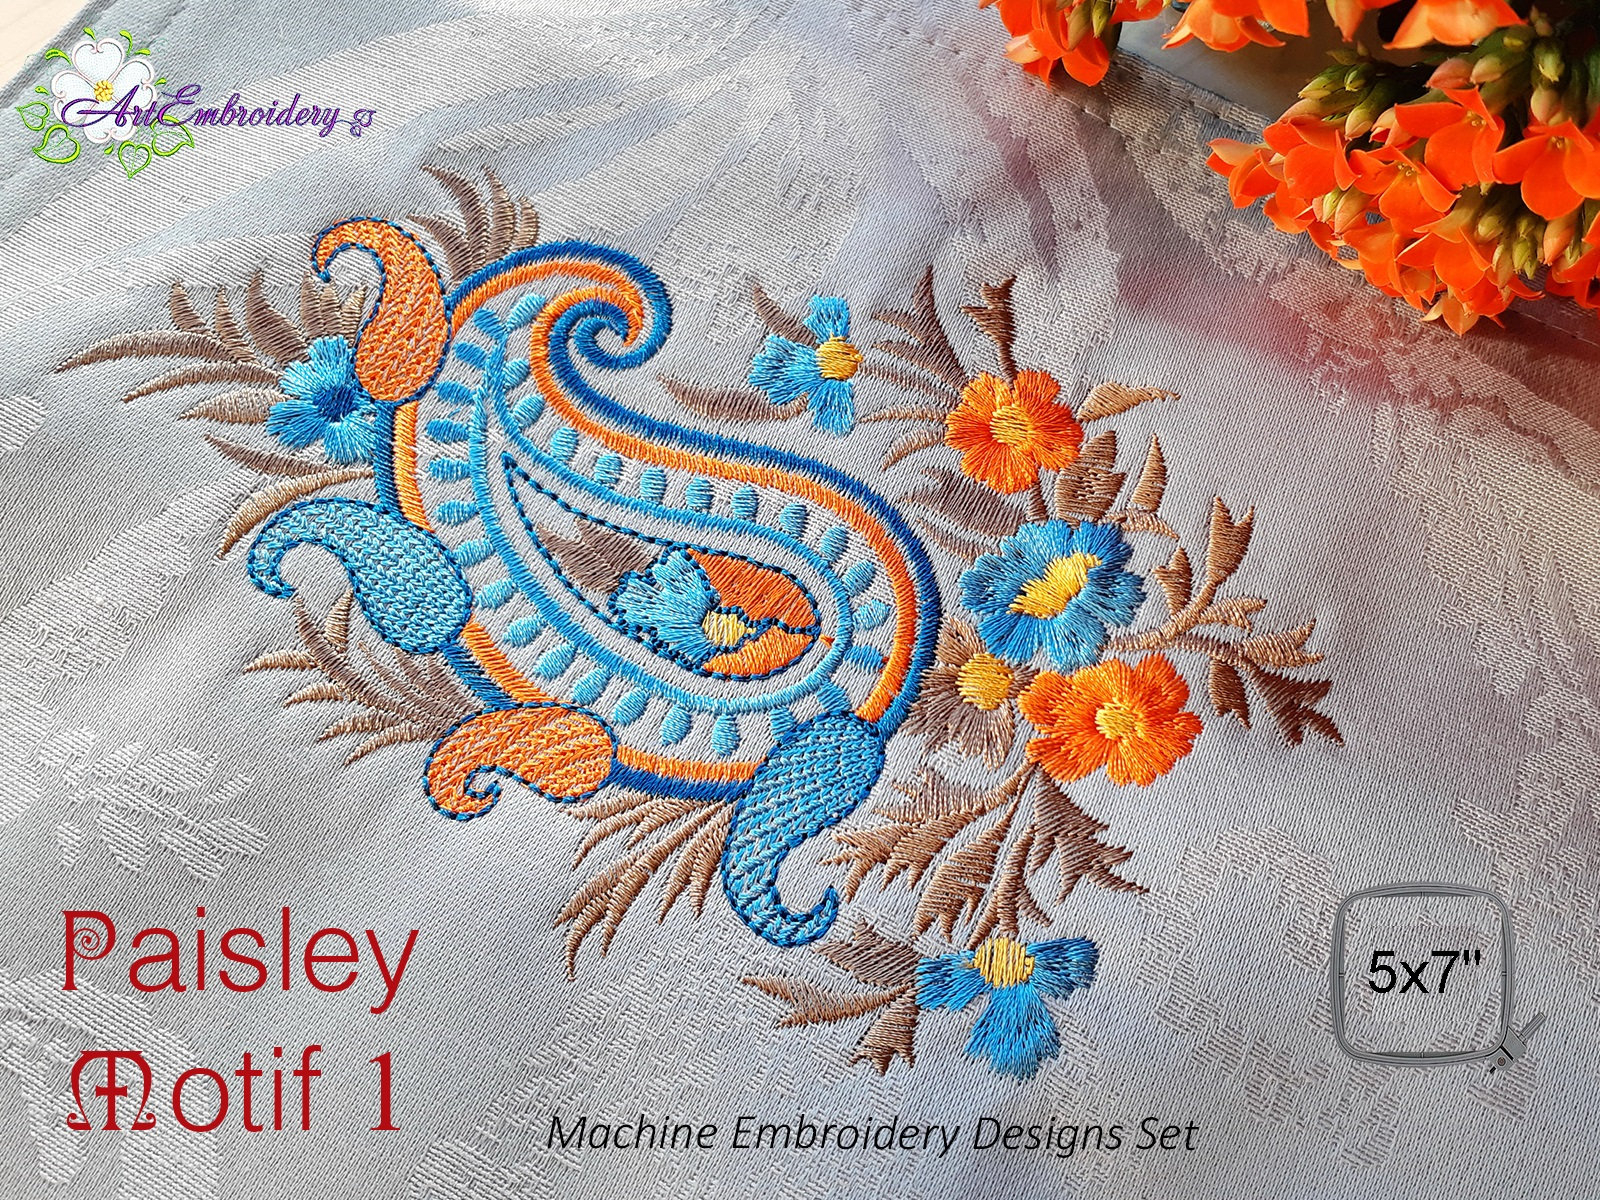 Convert Picture To Embroidery Pattern Paisley Motif 1 Machine Embroidery Designs Set For Hoop 5x7